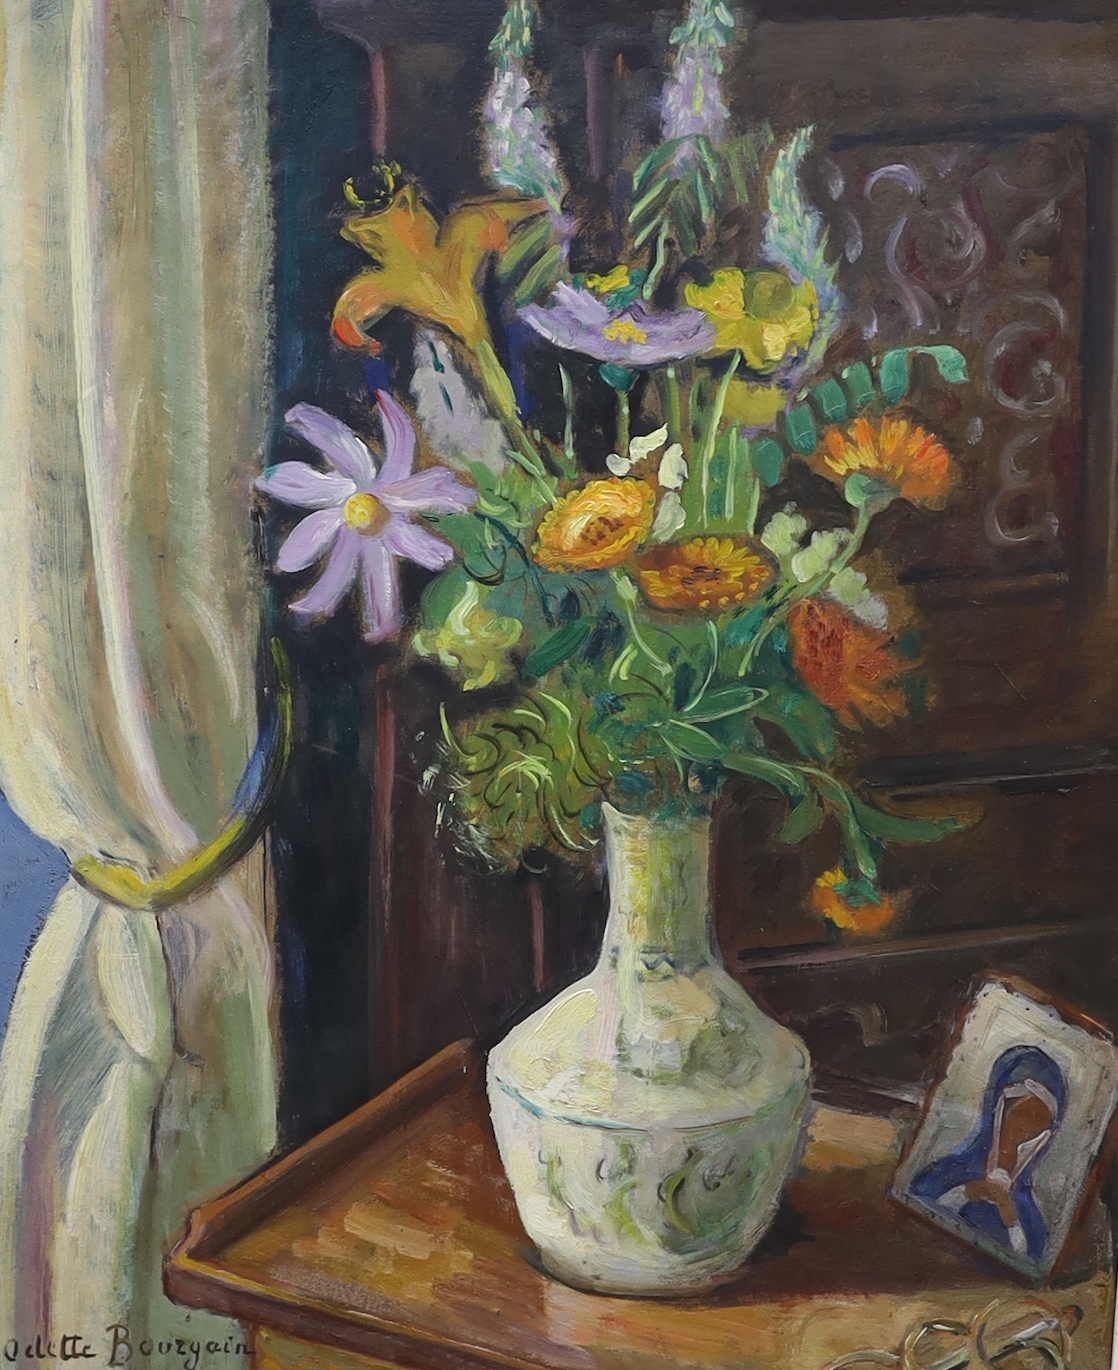 Odette Bourgain (French, 19/20th. C), oil on board, still life of flowers in a vase, signed, inscribed verso, 64 x 53cm